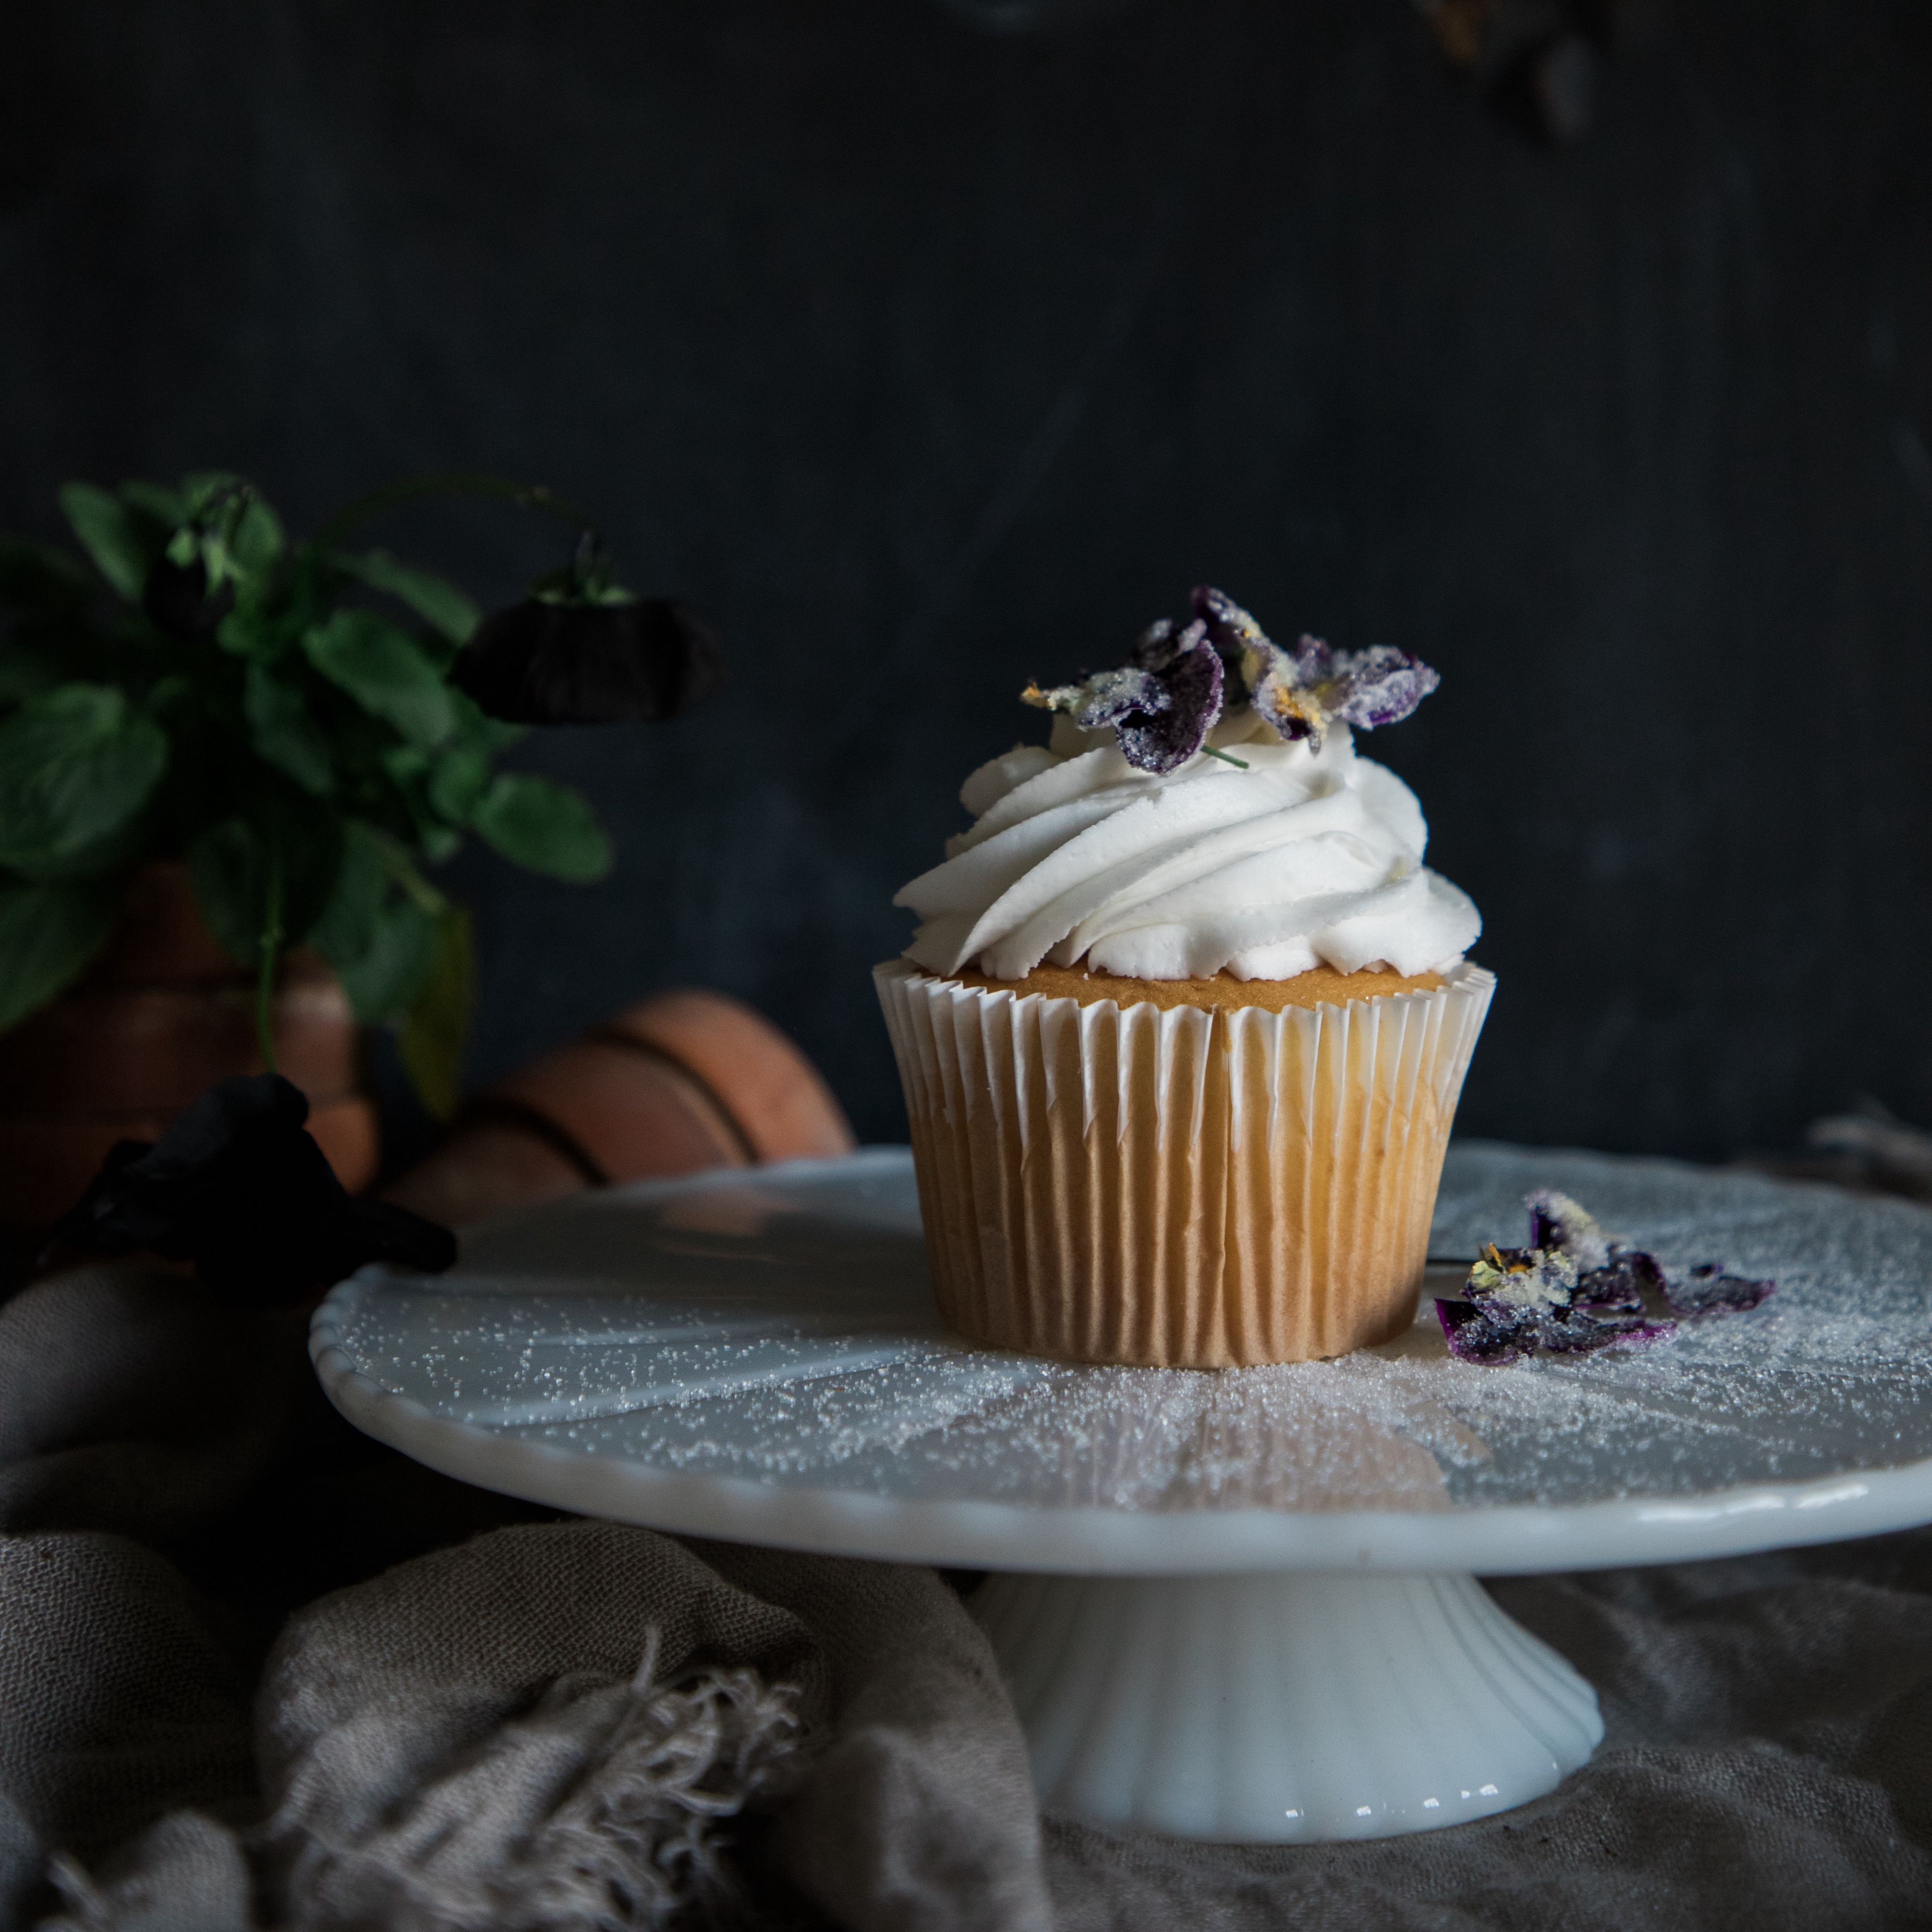 A cupcake with frosting and flowers on top - Cake, cupcakes